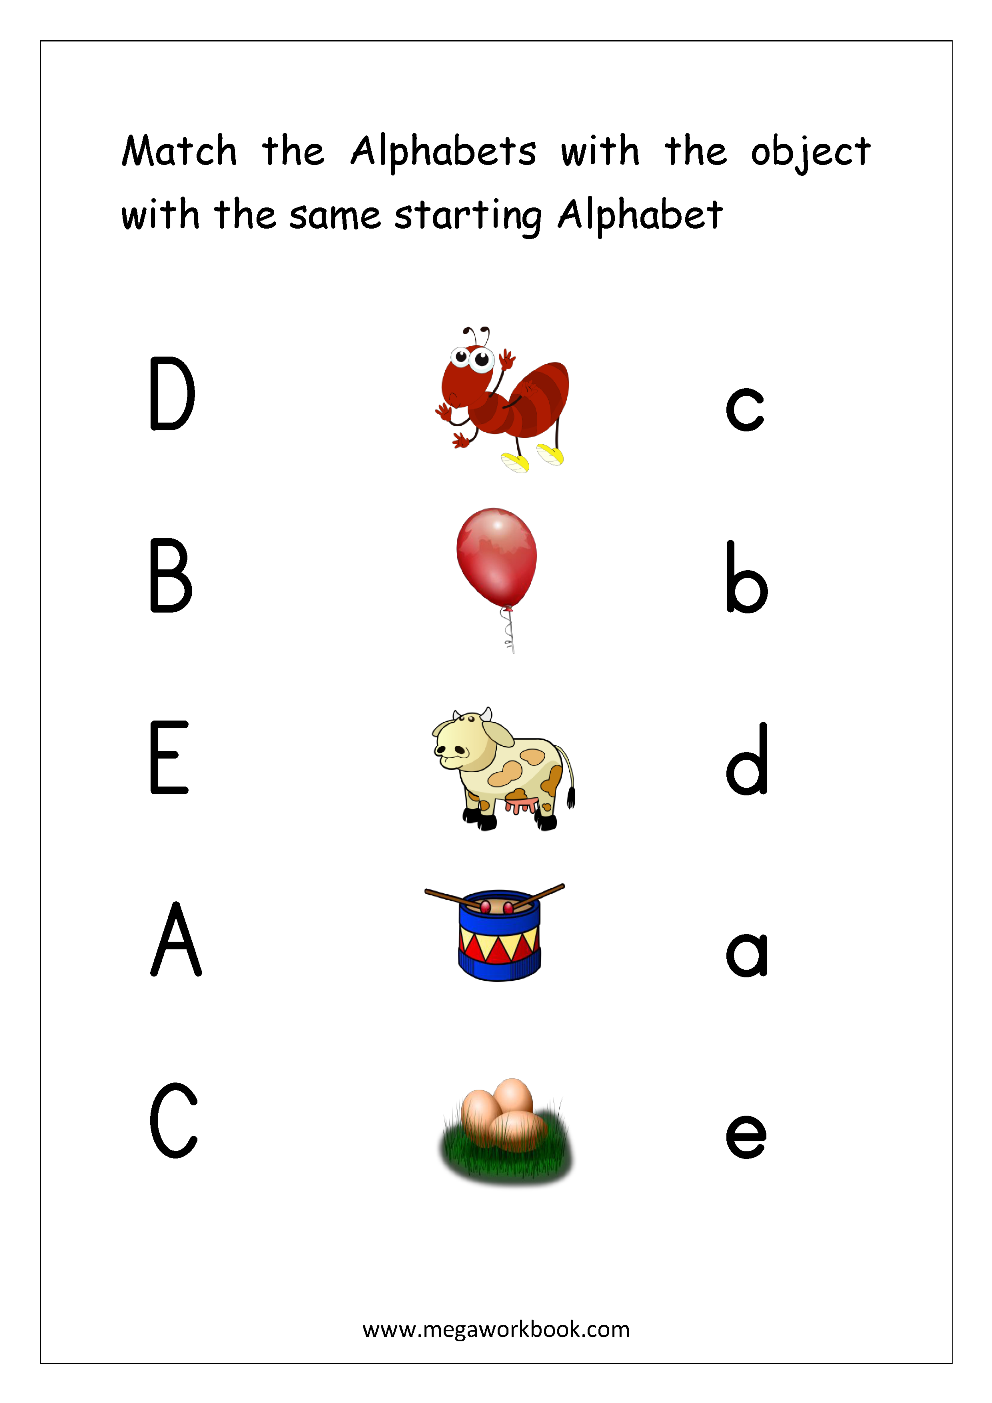 matching-letters-with-pictures-worksheets-educational-activity-for